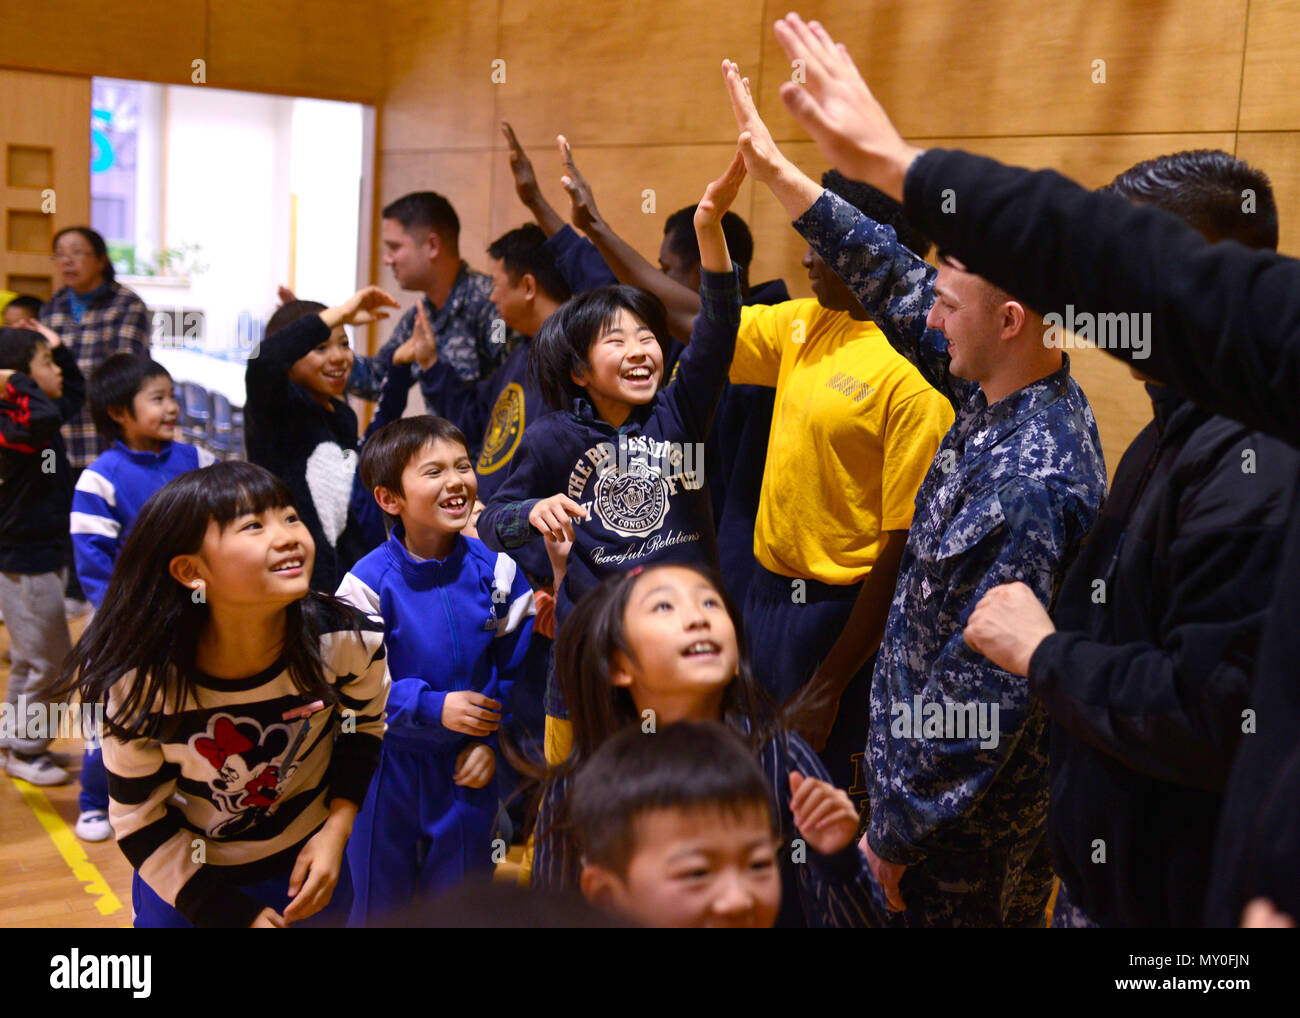 161219-N-OK605-167 MISAWA, Japan (Dec. 19, 2016) Sailors from Naval Air Facility Misawa (NAFM) interact with the children at the Ohzora Jido-Kan, a Japanese after school care center, for a special holiday themed visit. Sailors from NAFM volunteer to make bi-weekly visits to the after school care center as part of community relations efforts. (U.S. Navy Photo by Petty Officer 2nd Class Samuel Weldin/Released) Stock Photo